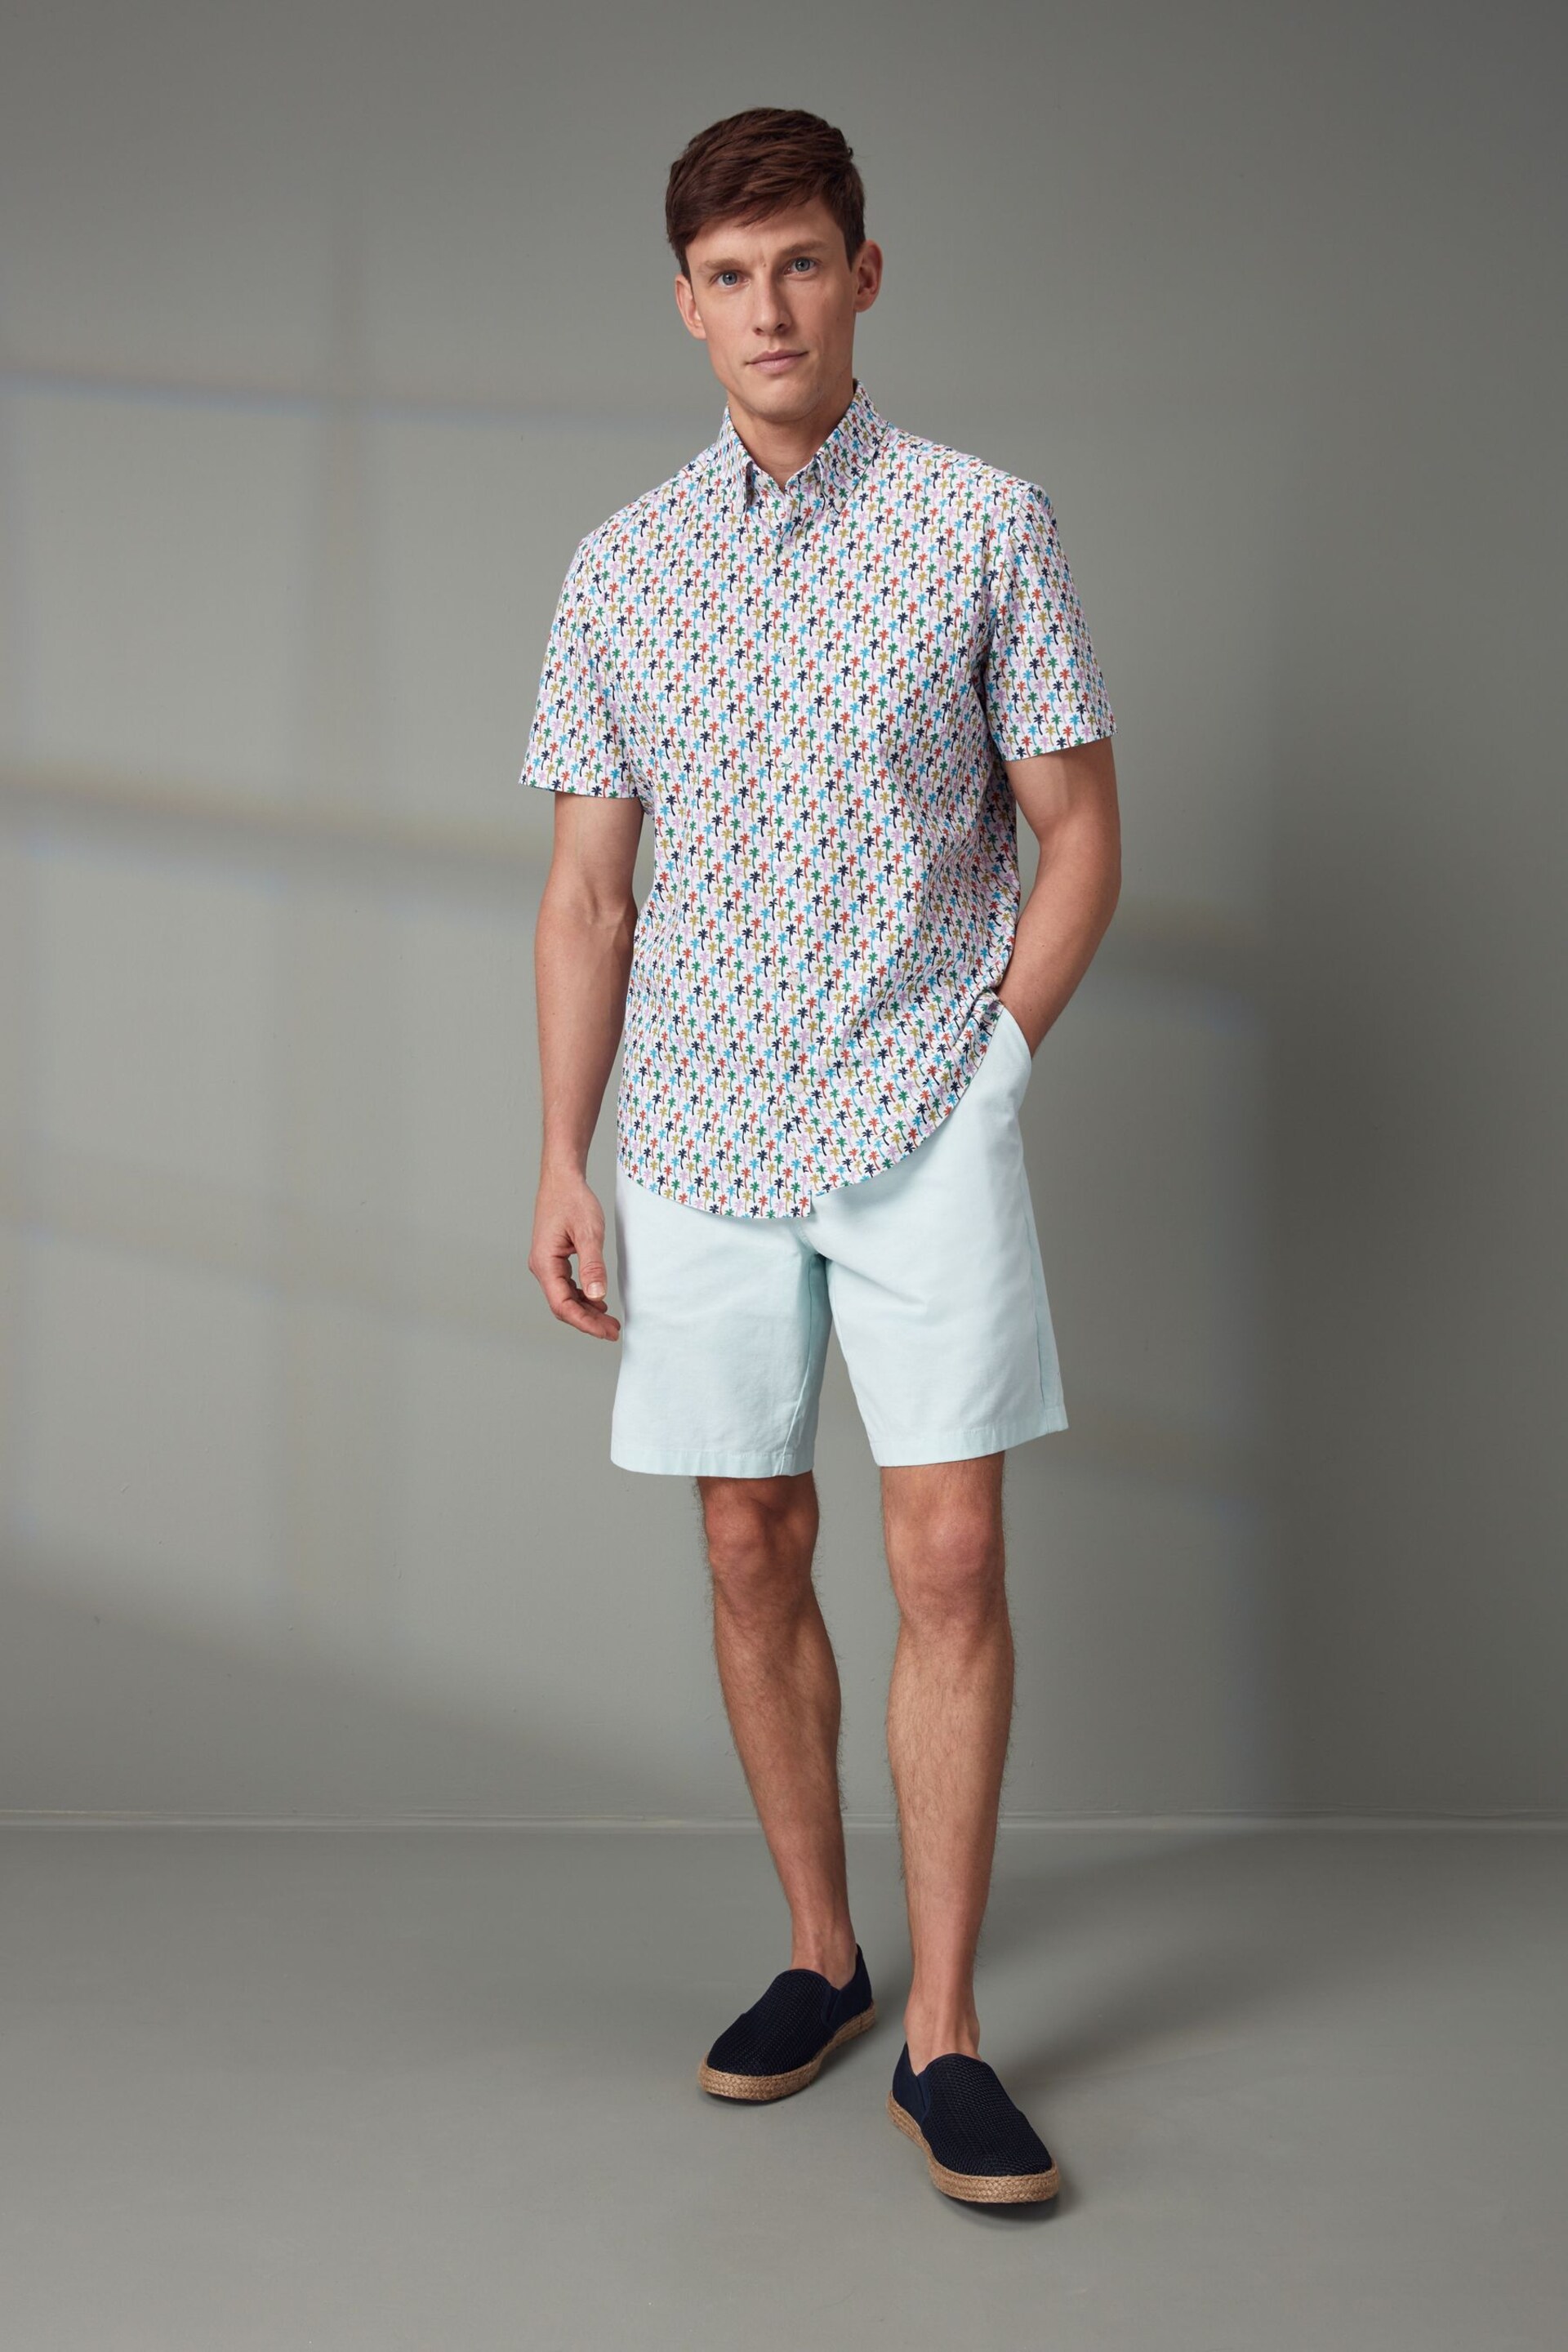 White/Multicolour Palm Tree Easy Iron Button Down Short Sleeve Oxford Shirt - Image 2 of 6